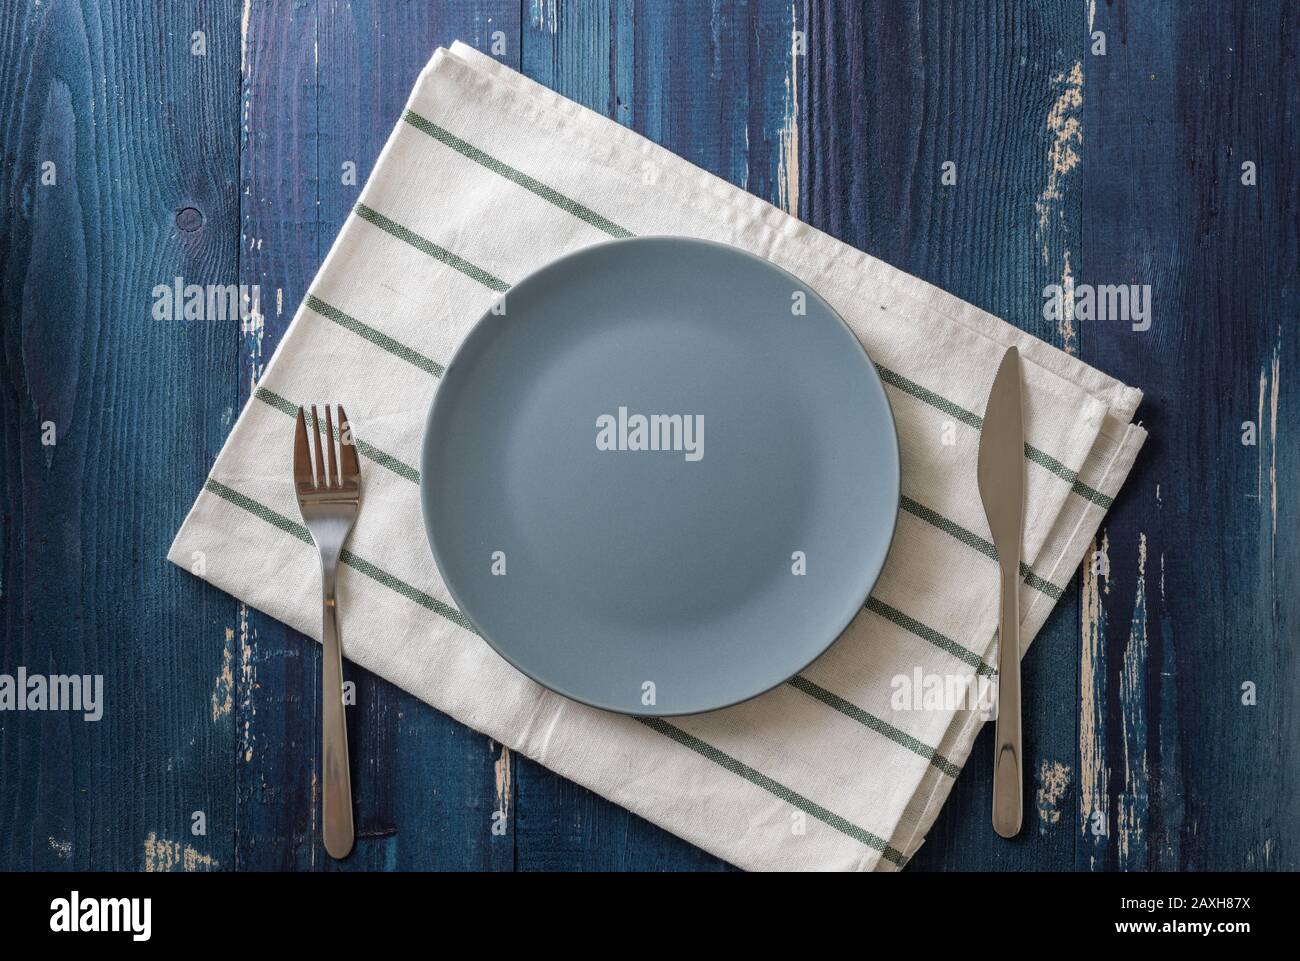 Blue Round Plate with utensils and dish towel on ocean blue wooden table background Stock Photo